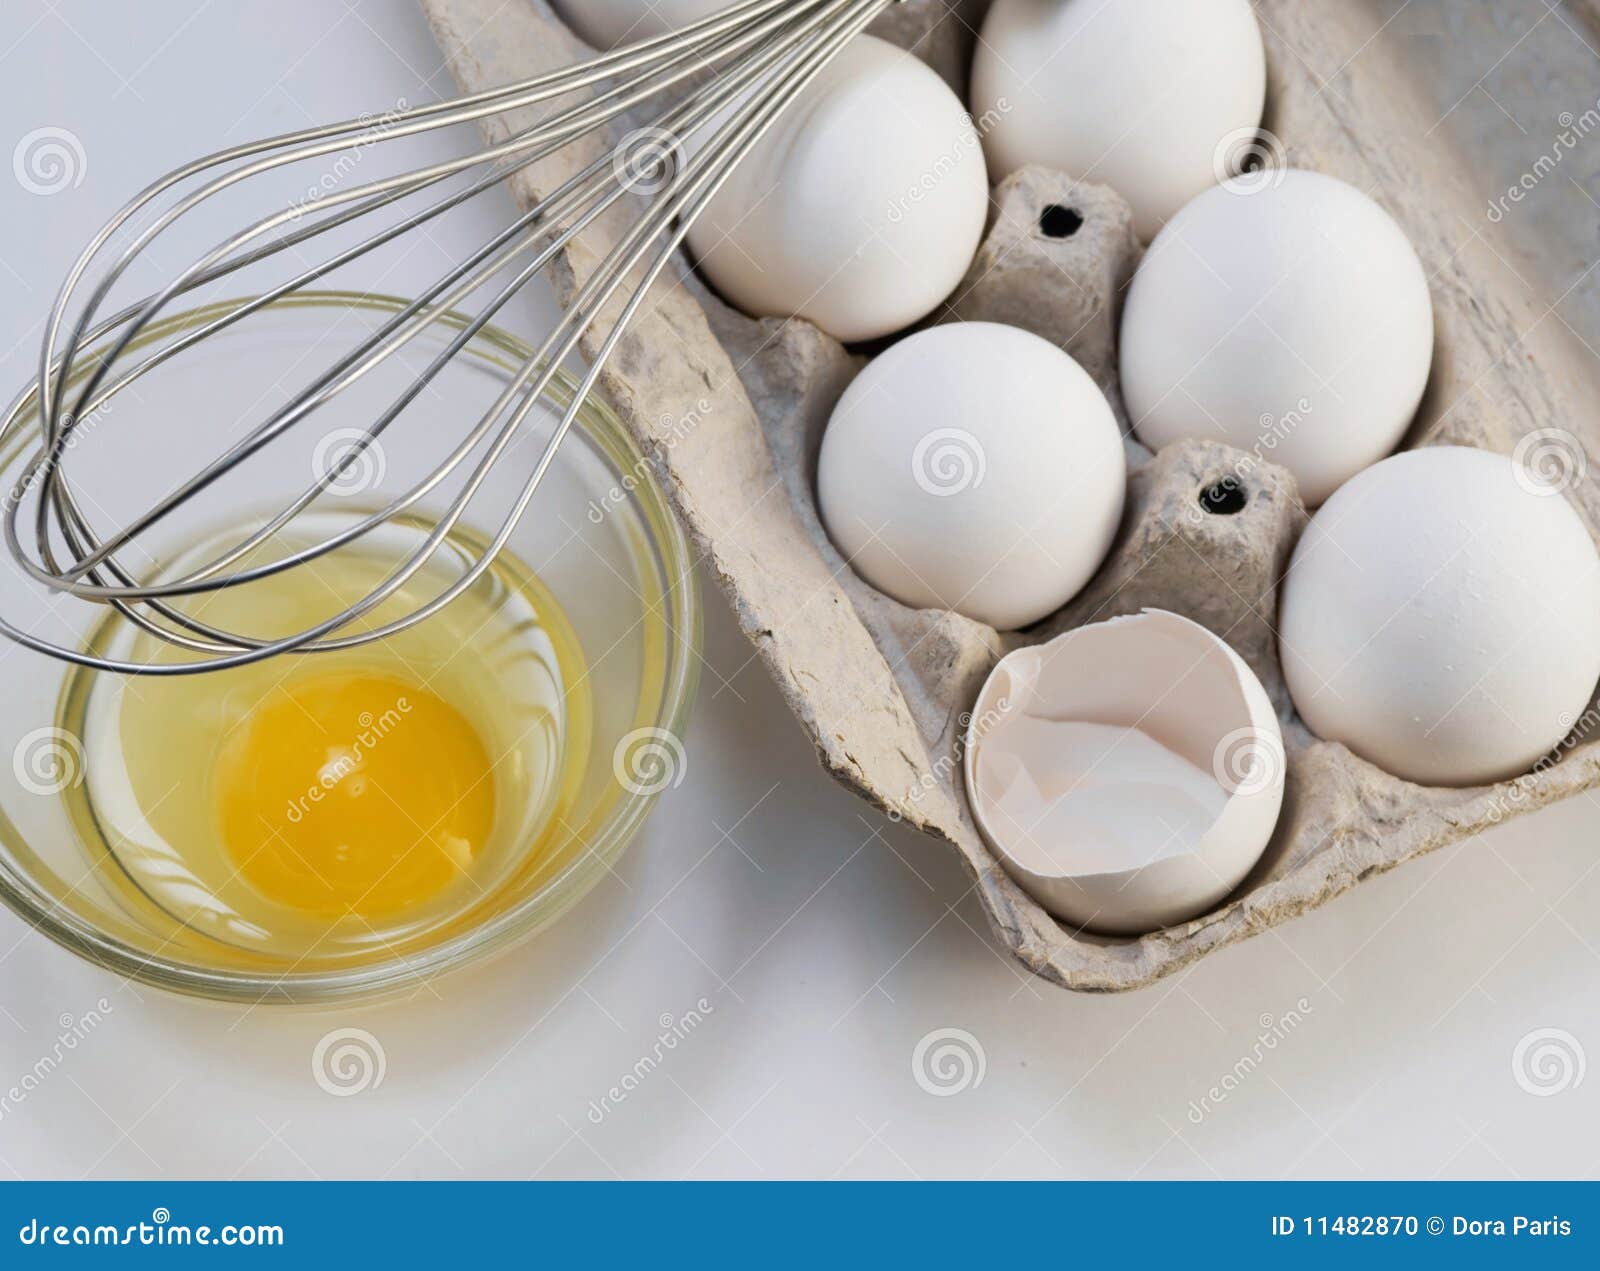 carton of eggs with whisk